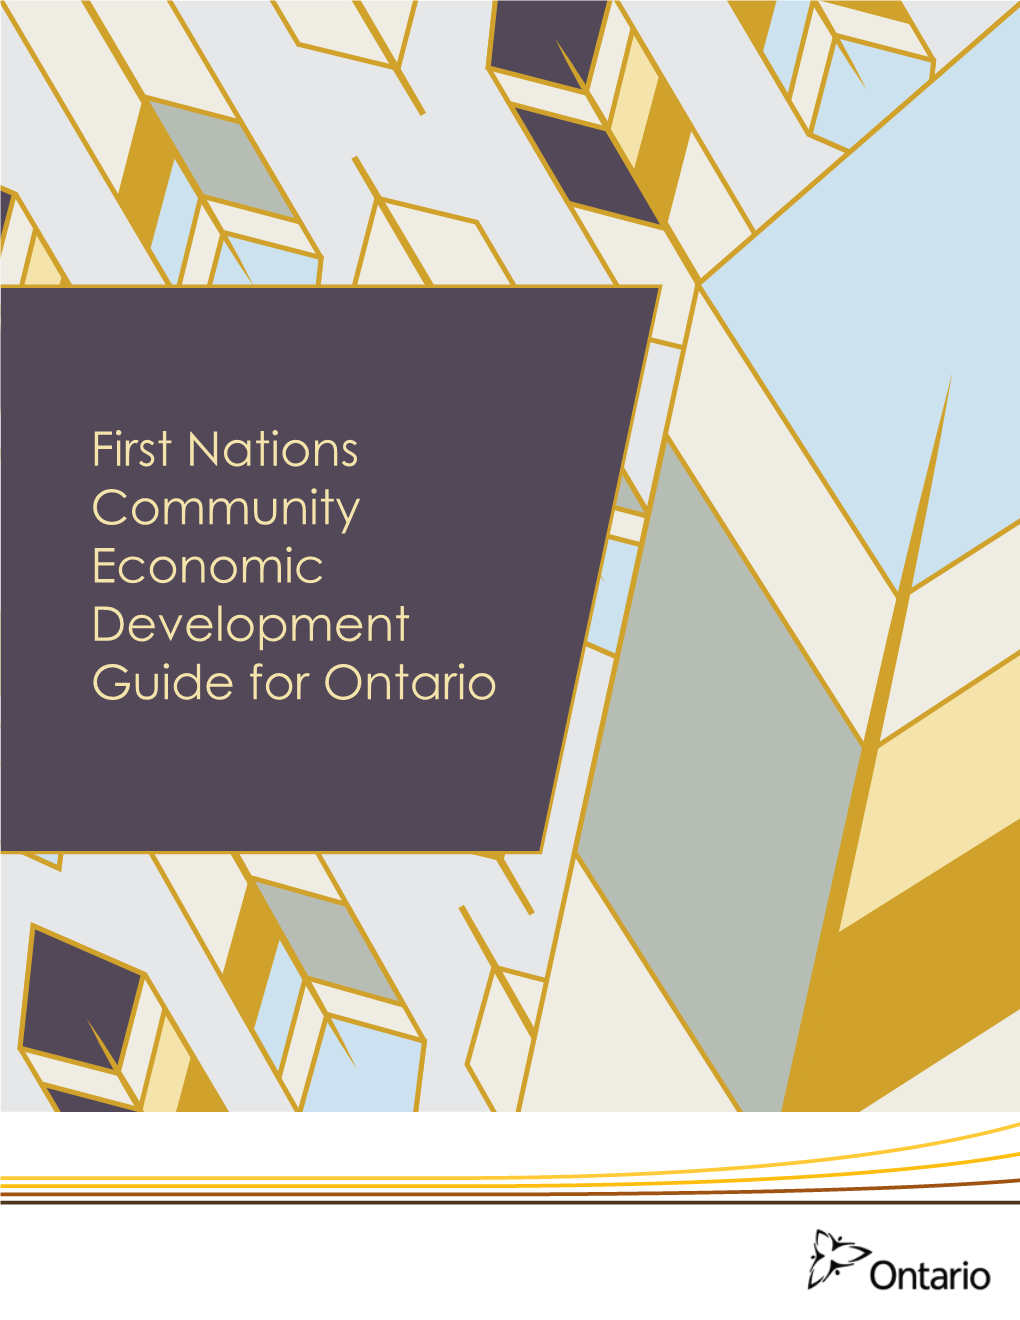 First Nations Community Economic Development Guide for Ontario